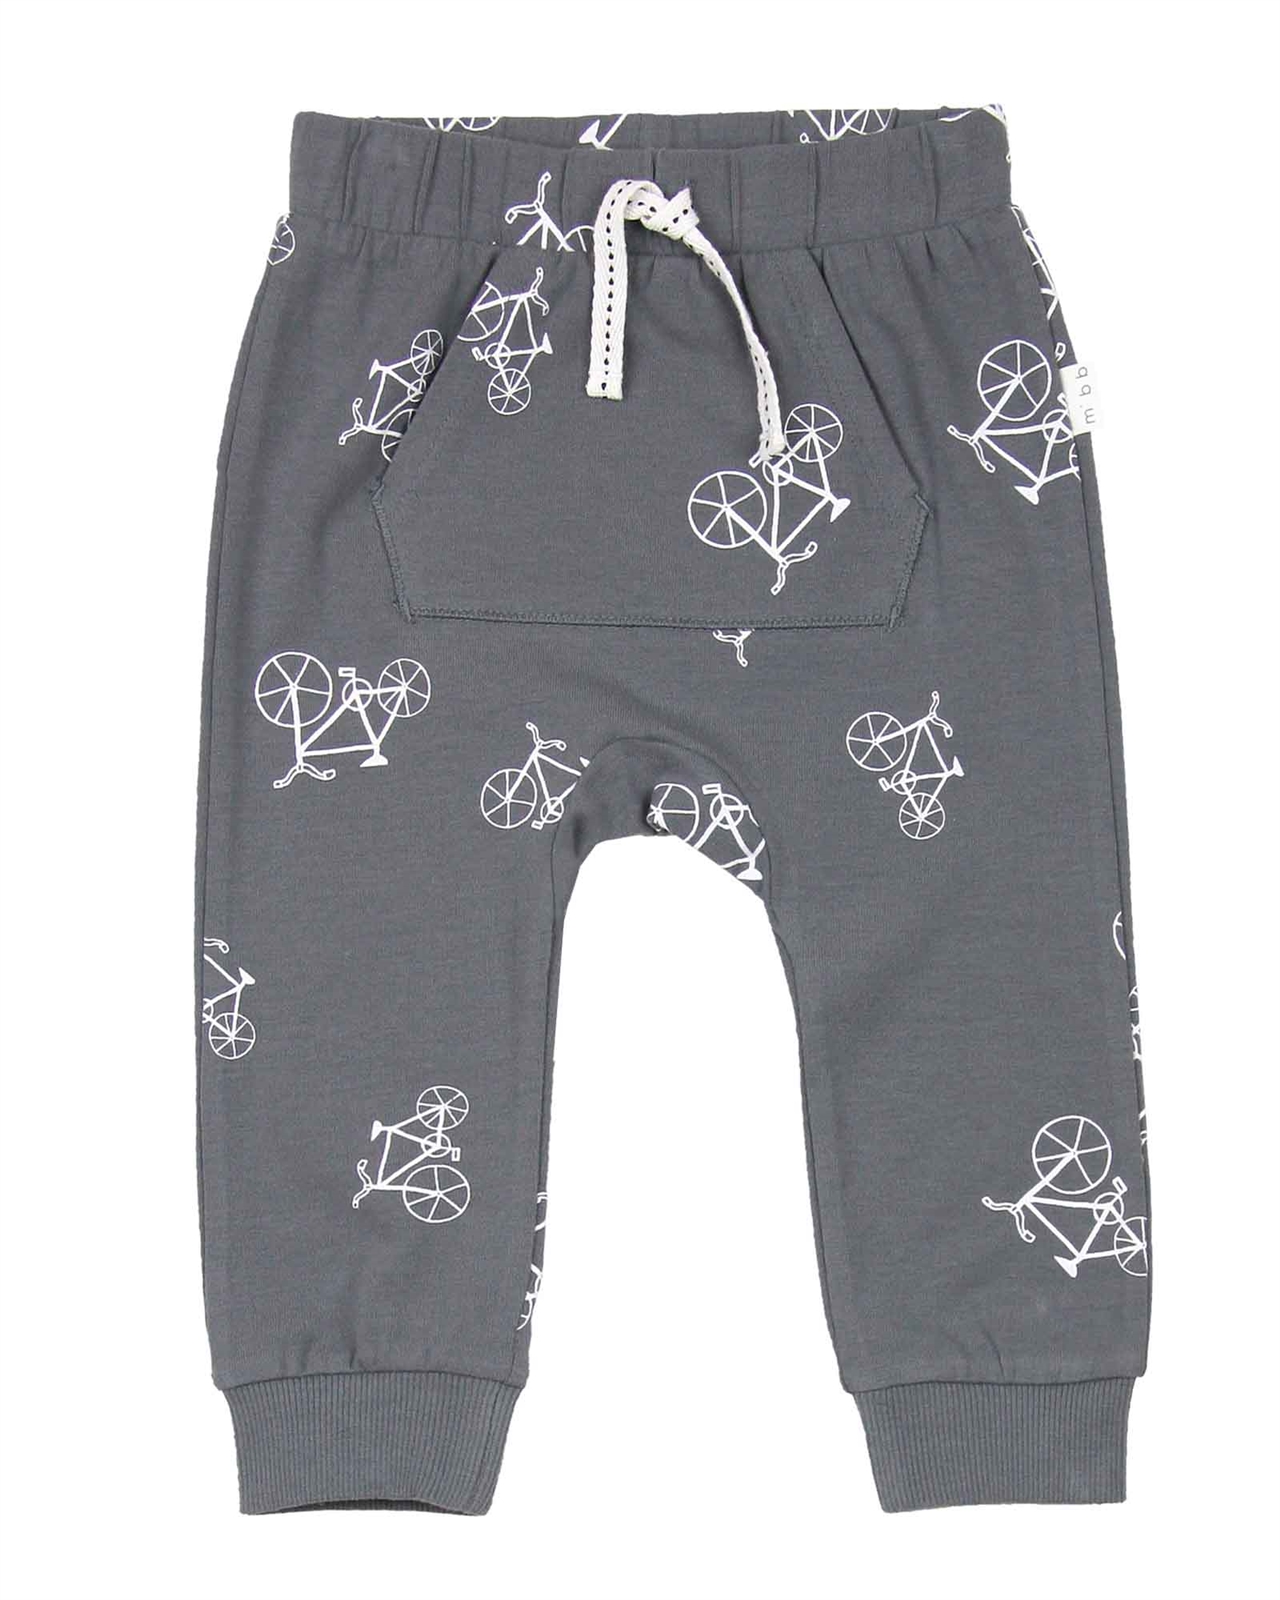 Sizes 6M-4 MILES BABY Boys Jersey Pants in Bicycles Print